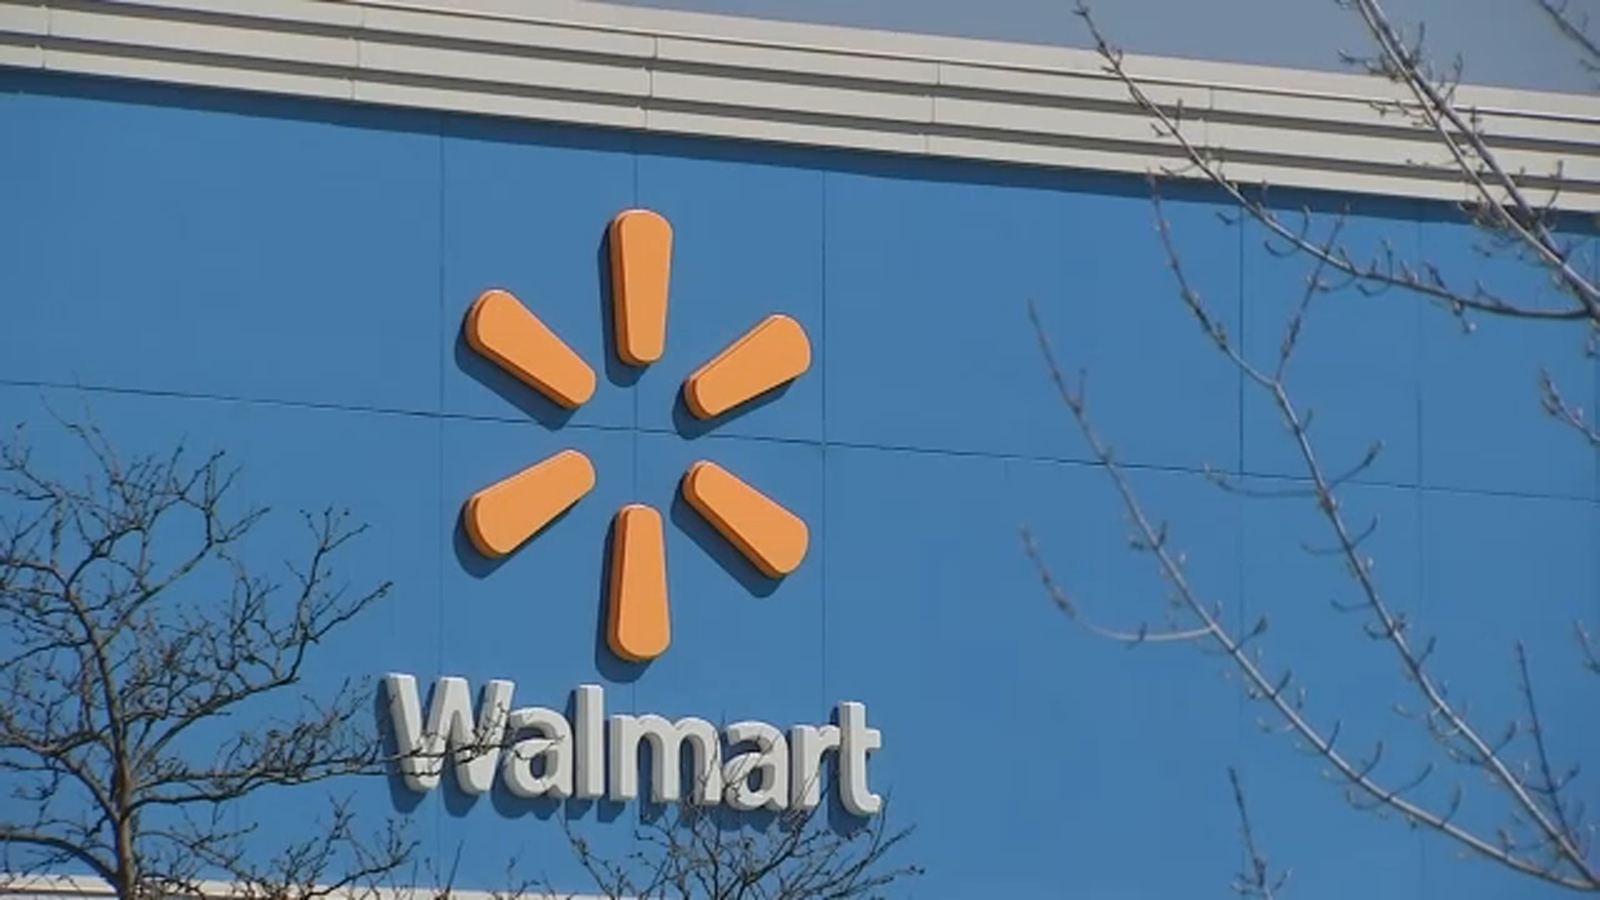 What Walmart’s pullback from Chicago says about Corporate America’s limits